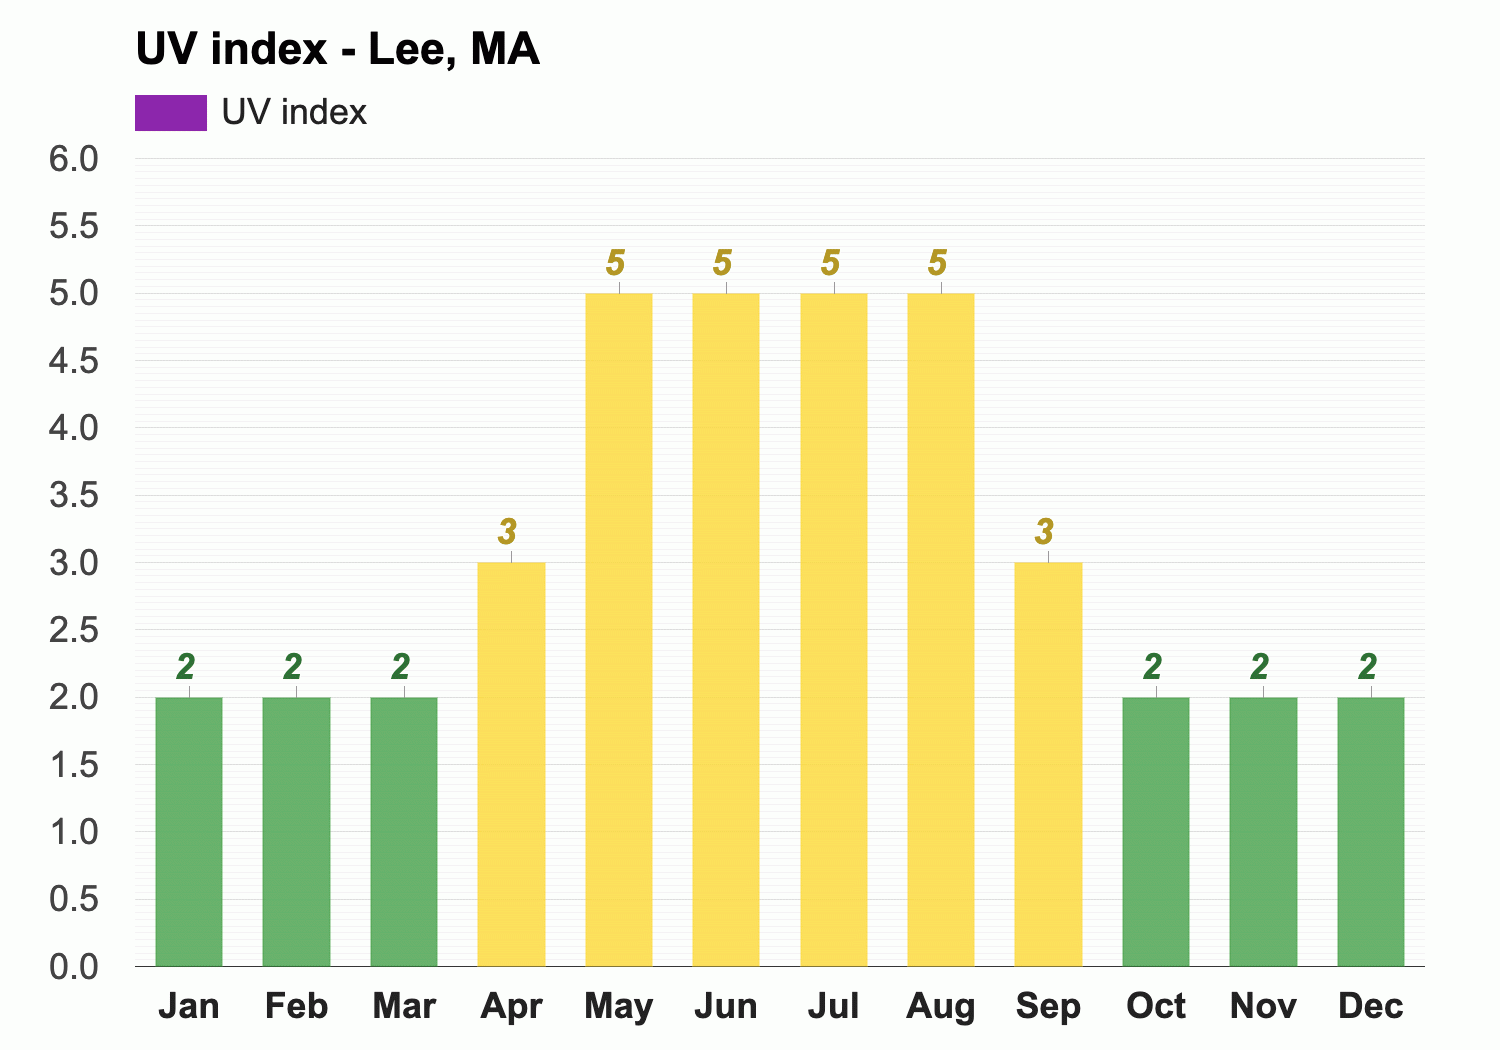 Lee, MA - Climate & Monthly weather forecast